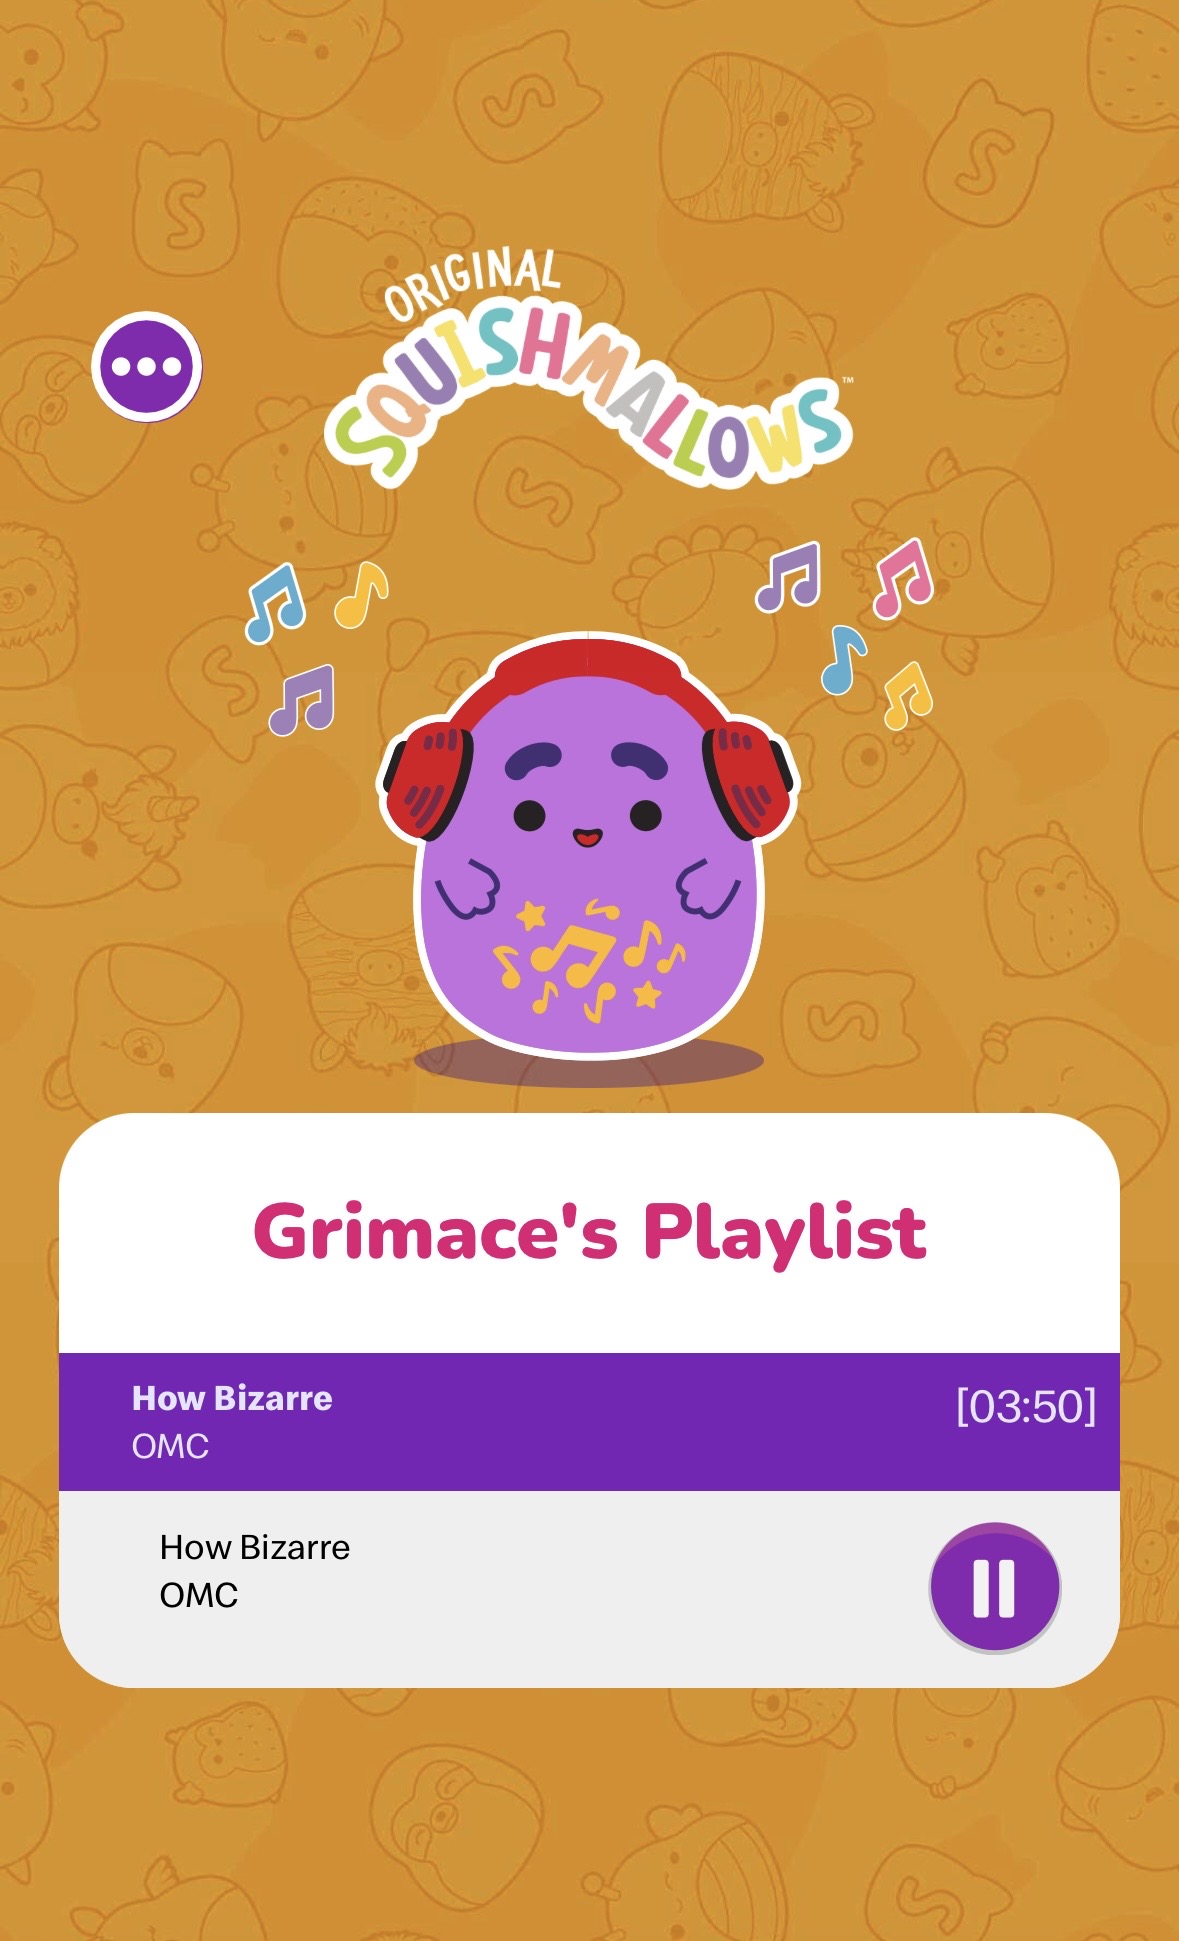 An image of the Grimace Squishmallows and his playlist on a brown background